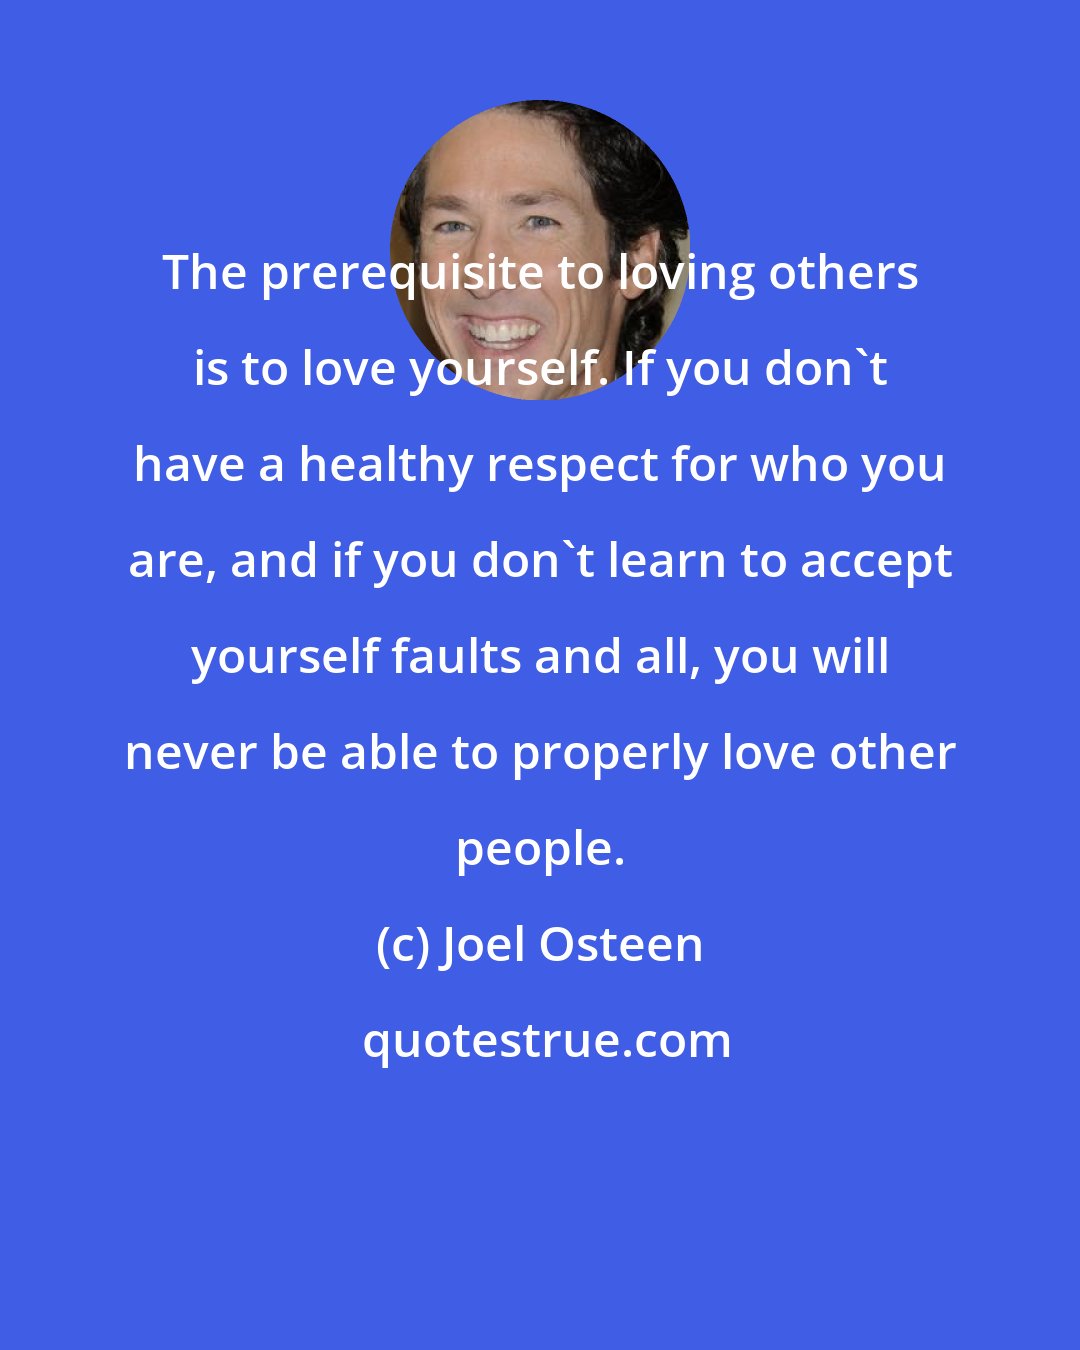 Joel Osteen: The prerequisite to loving others is to love yourself. If you don't have a healthy respect for who you are, and if you don't learn to accept yourself faults and all, you will never be able to properly love other people.